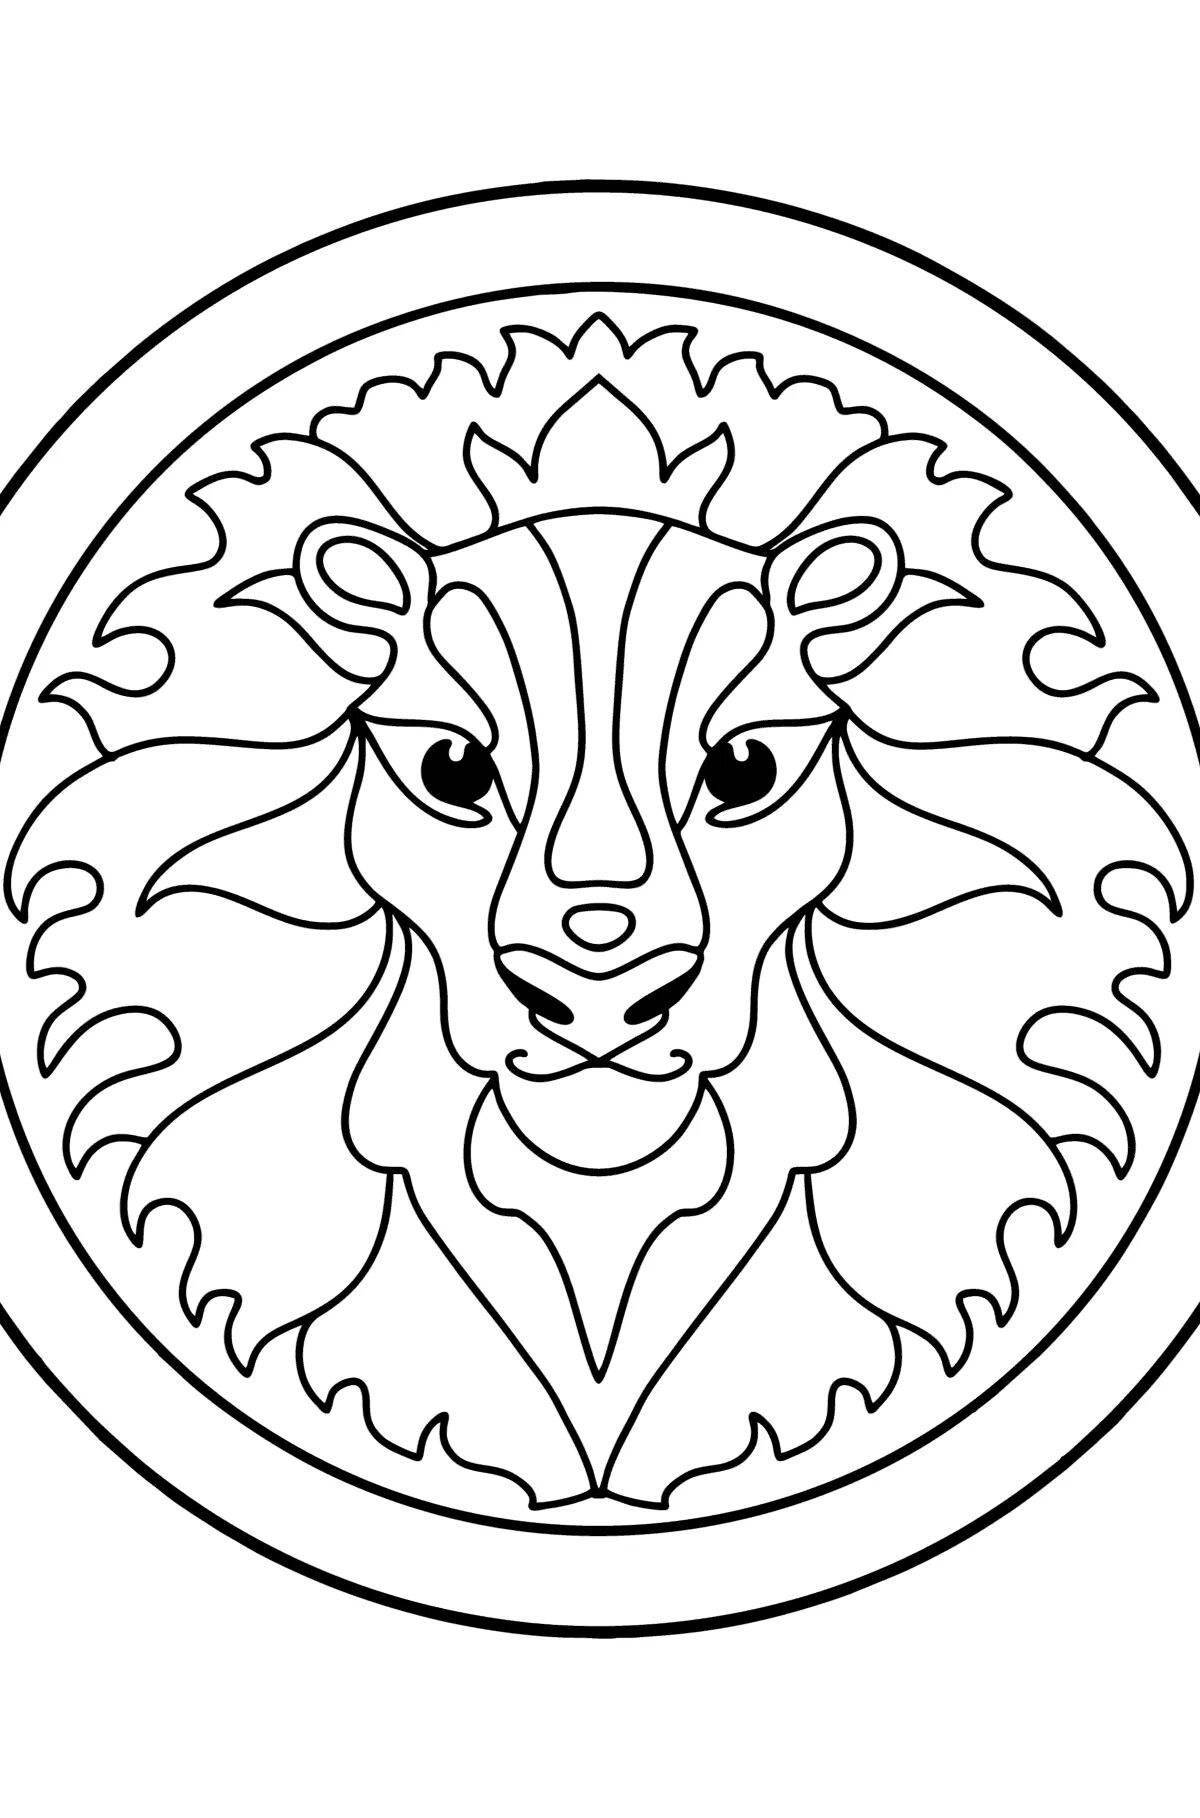 Colorful zodiac signs coloring pages for kids to color